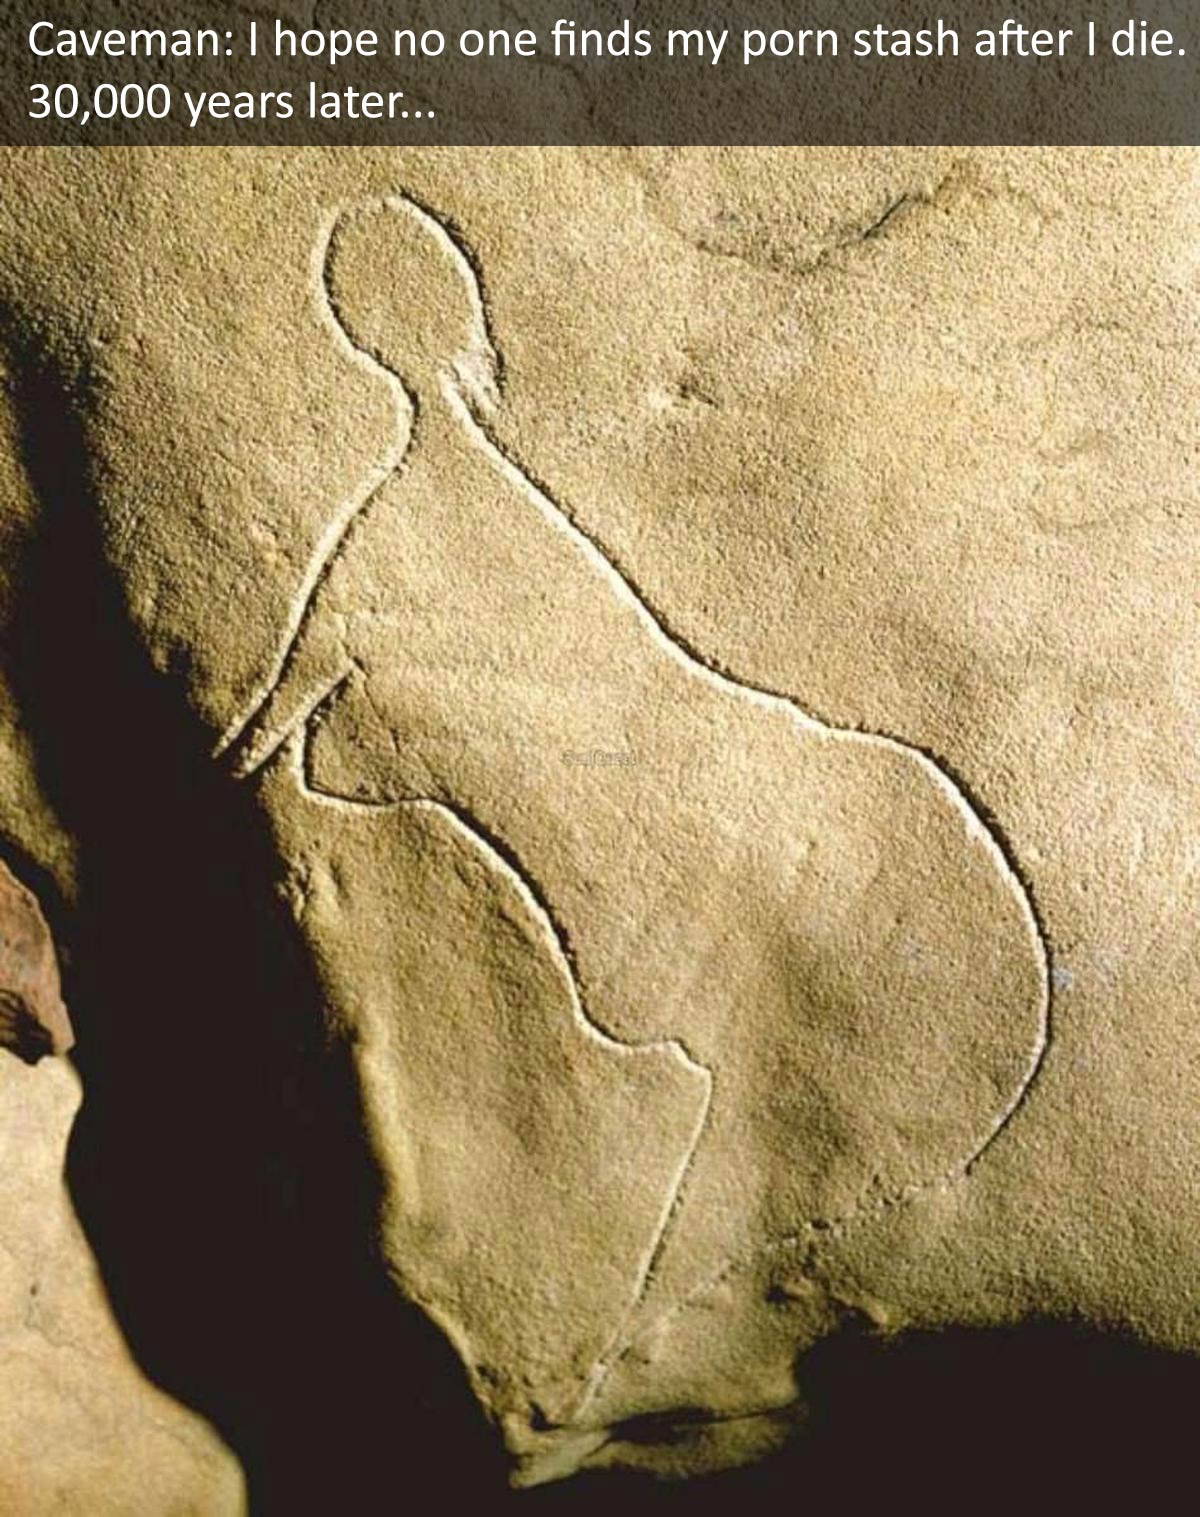 Cave etching of a nude woman, believed to be 30,000 years old, found in Grotte de Cussac, France